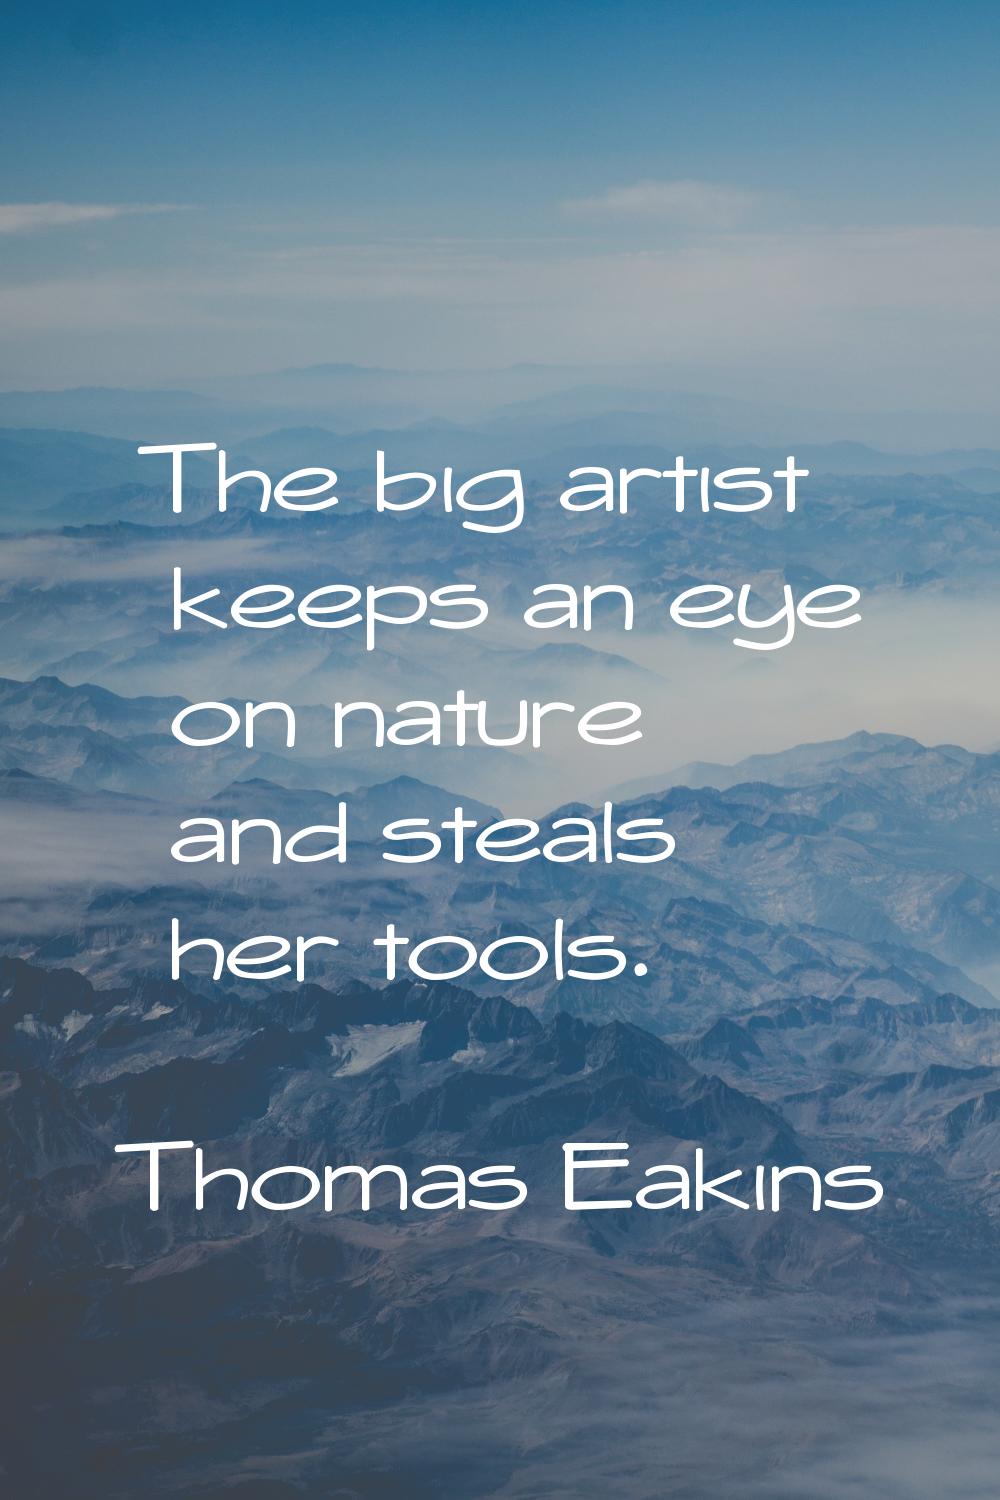 The big artist keeps an eye on nature and steals her tools.